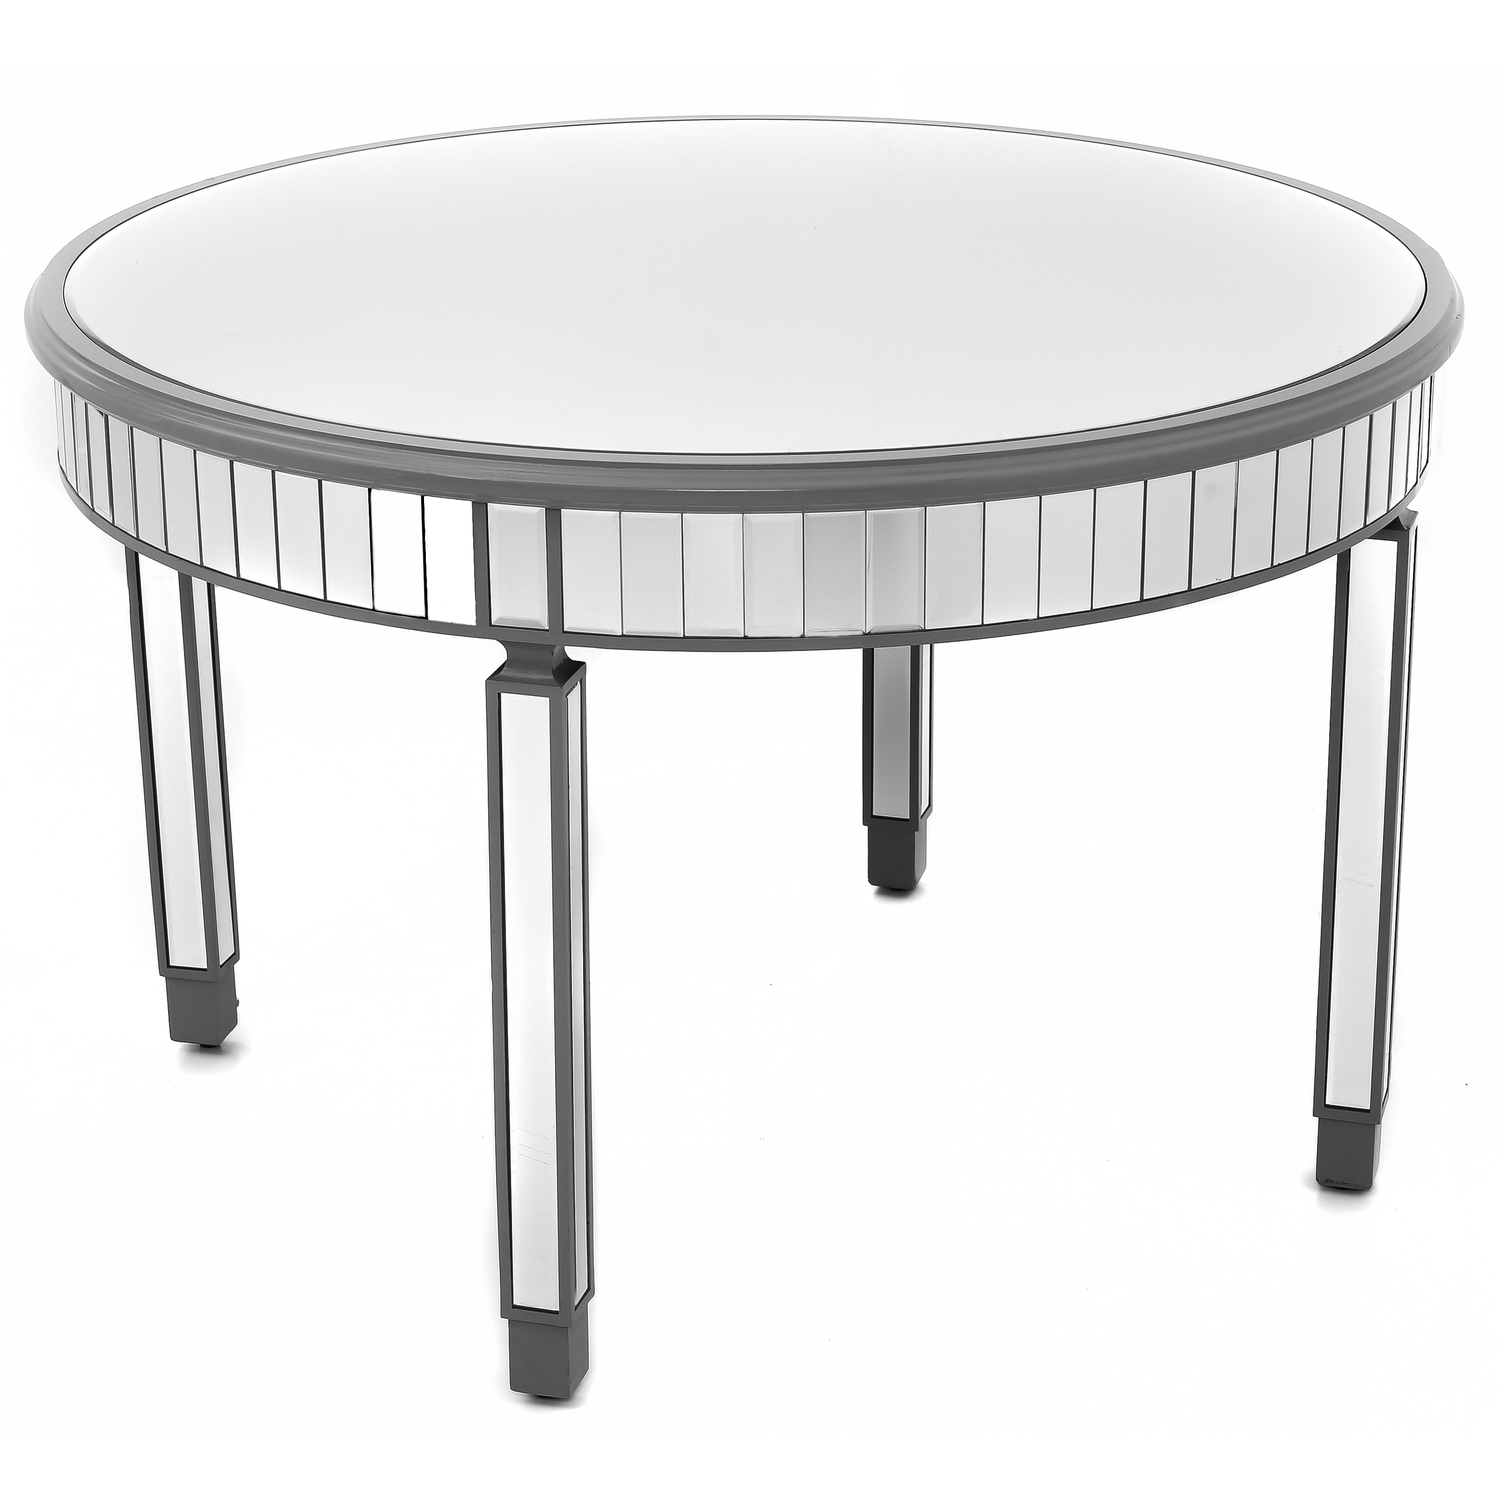 Paloma Collection Mirrored Round Dining Table - Image 1